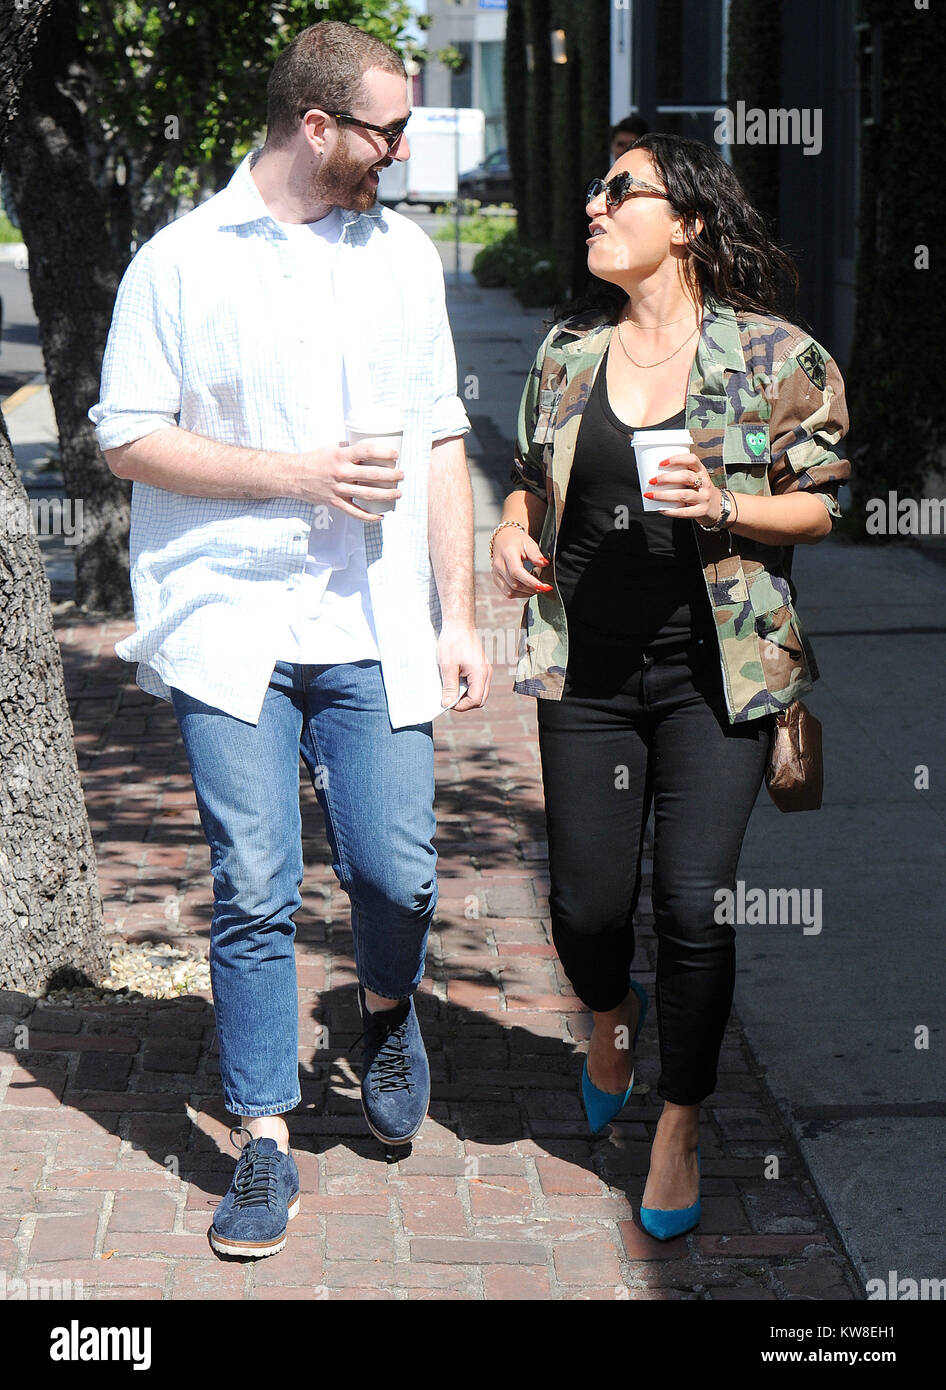 LOS ANGELES, CA - APRIL 25: Singer Sam Smith gets coffee with an  unidentified woman. Samuel Frederick "Sam" Smith is an English  singer-songwriter. He rose to fame in October 2012 when he